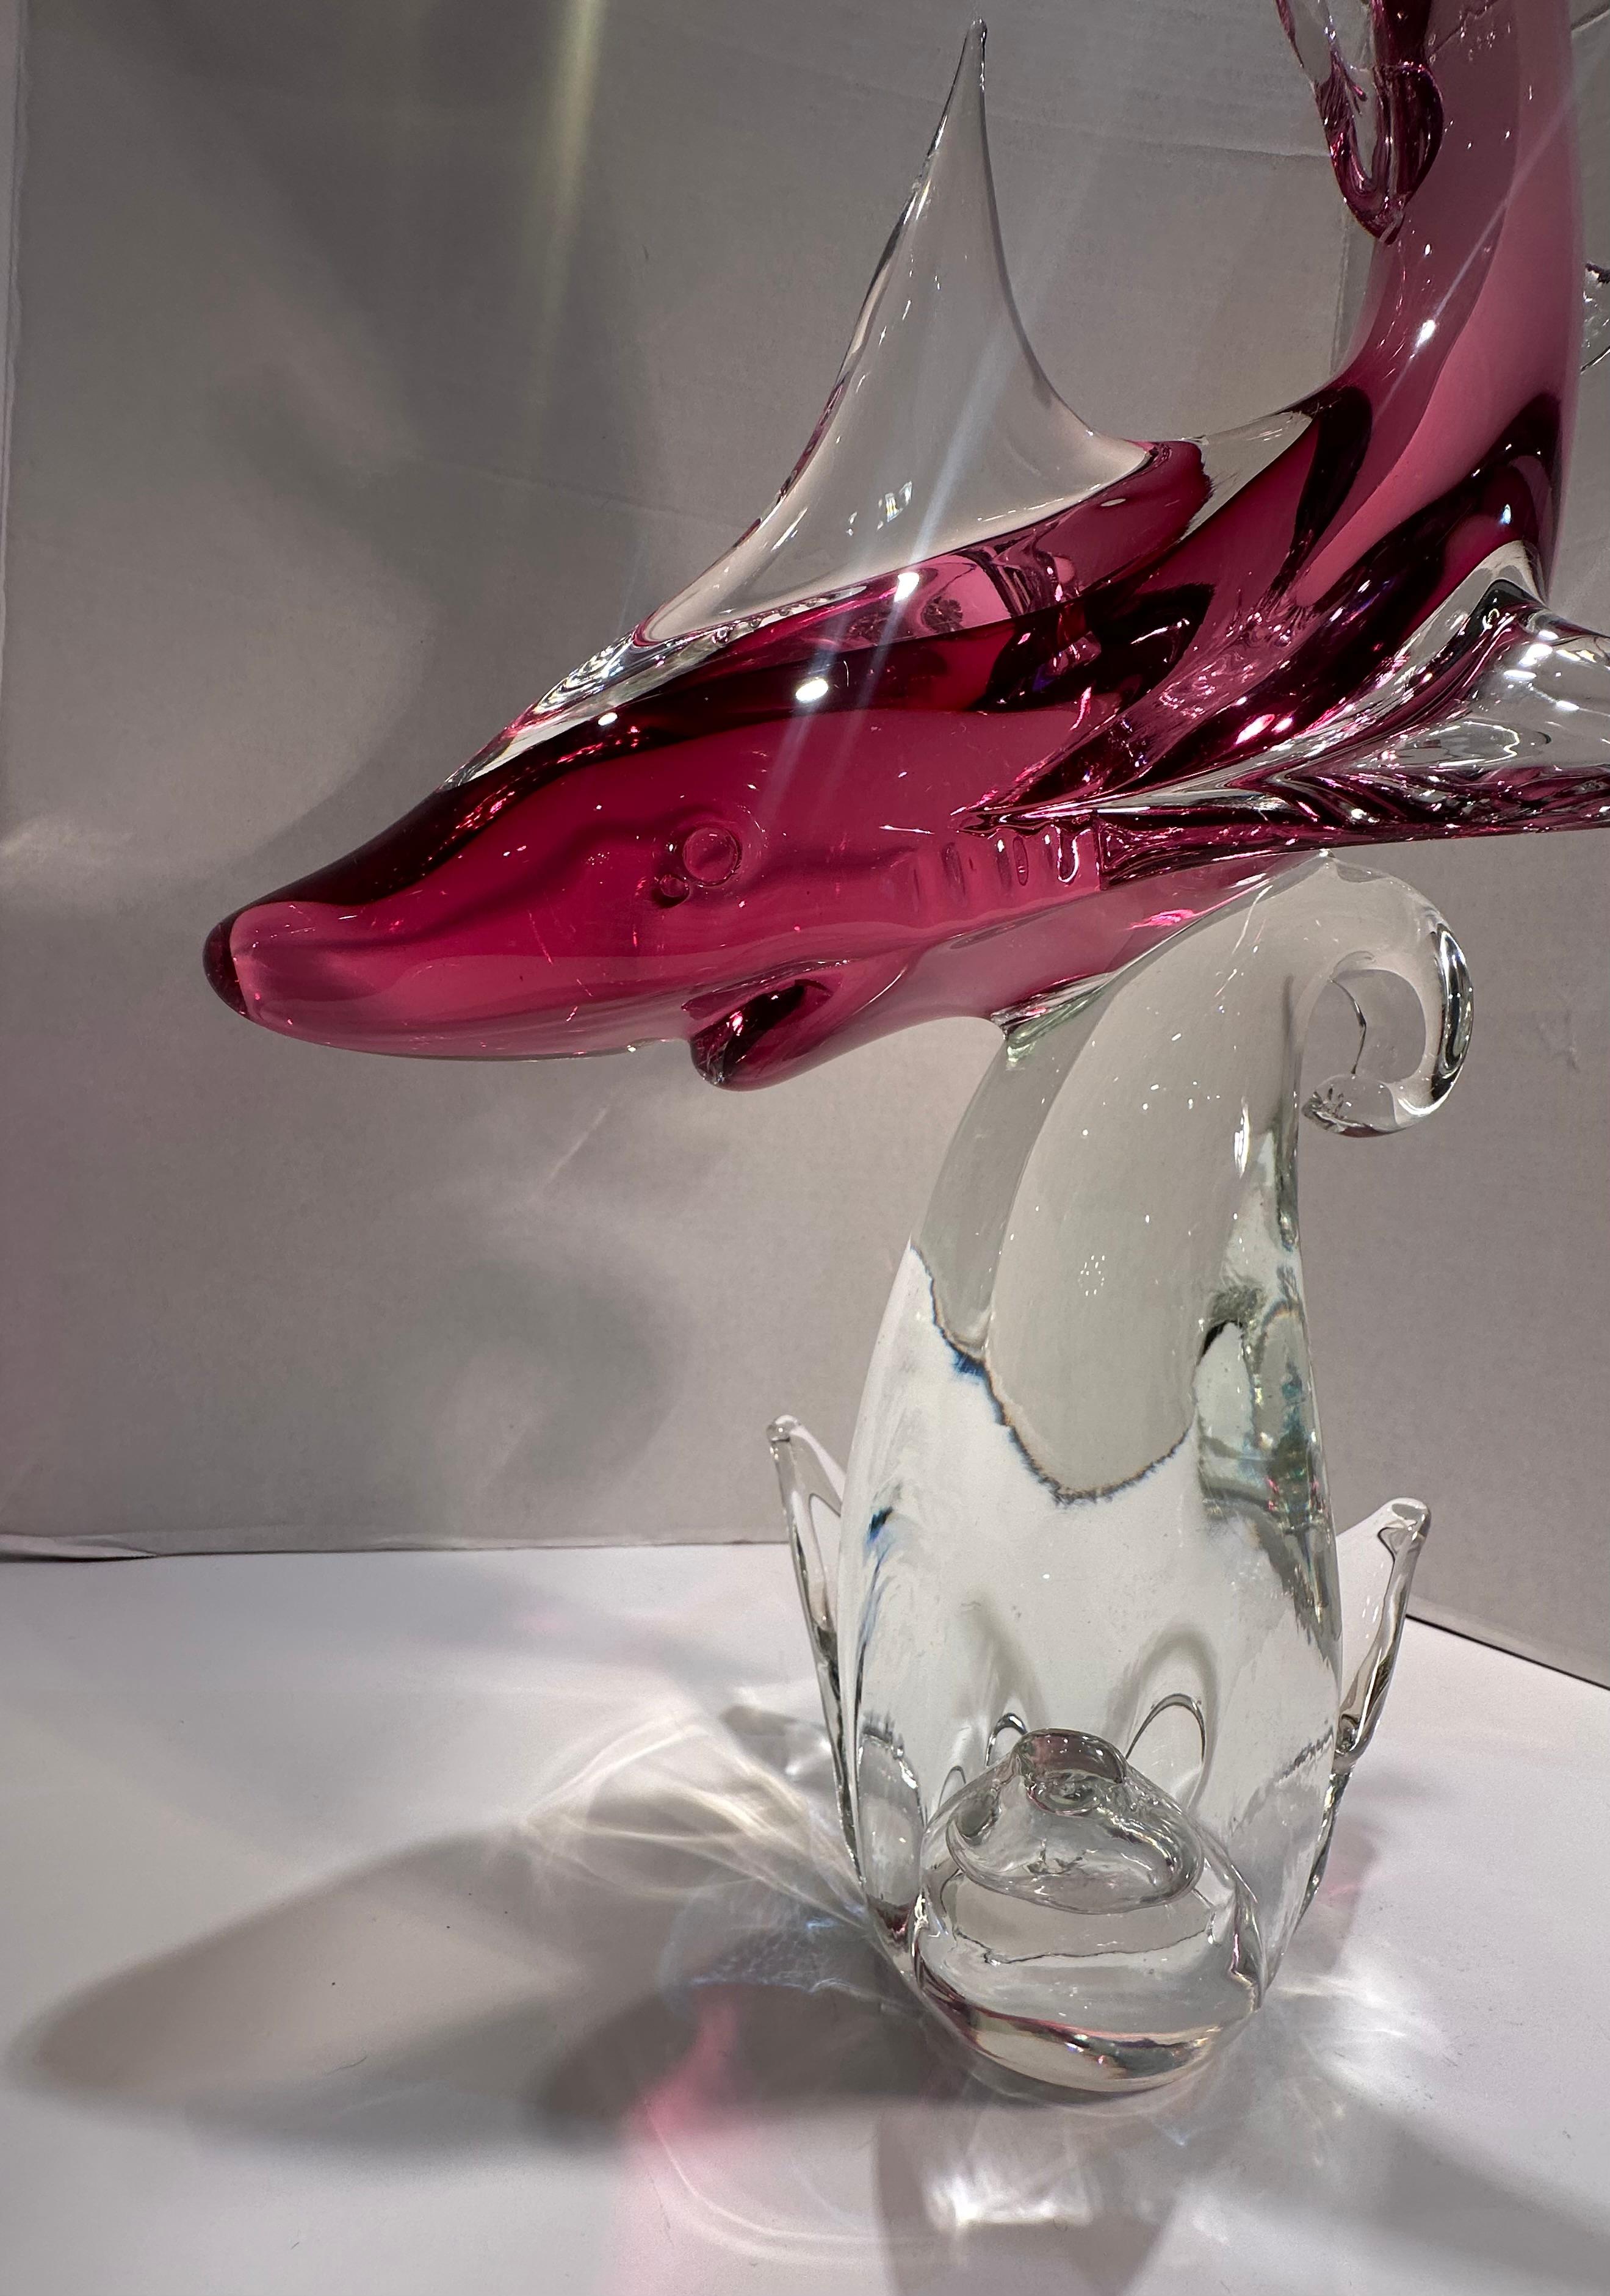 20th Century Impressive Over Two Feet Tall Murano Art Glass Hot Pink Shark on a Wave Figurine For Sale